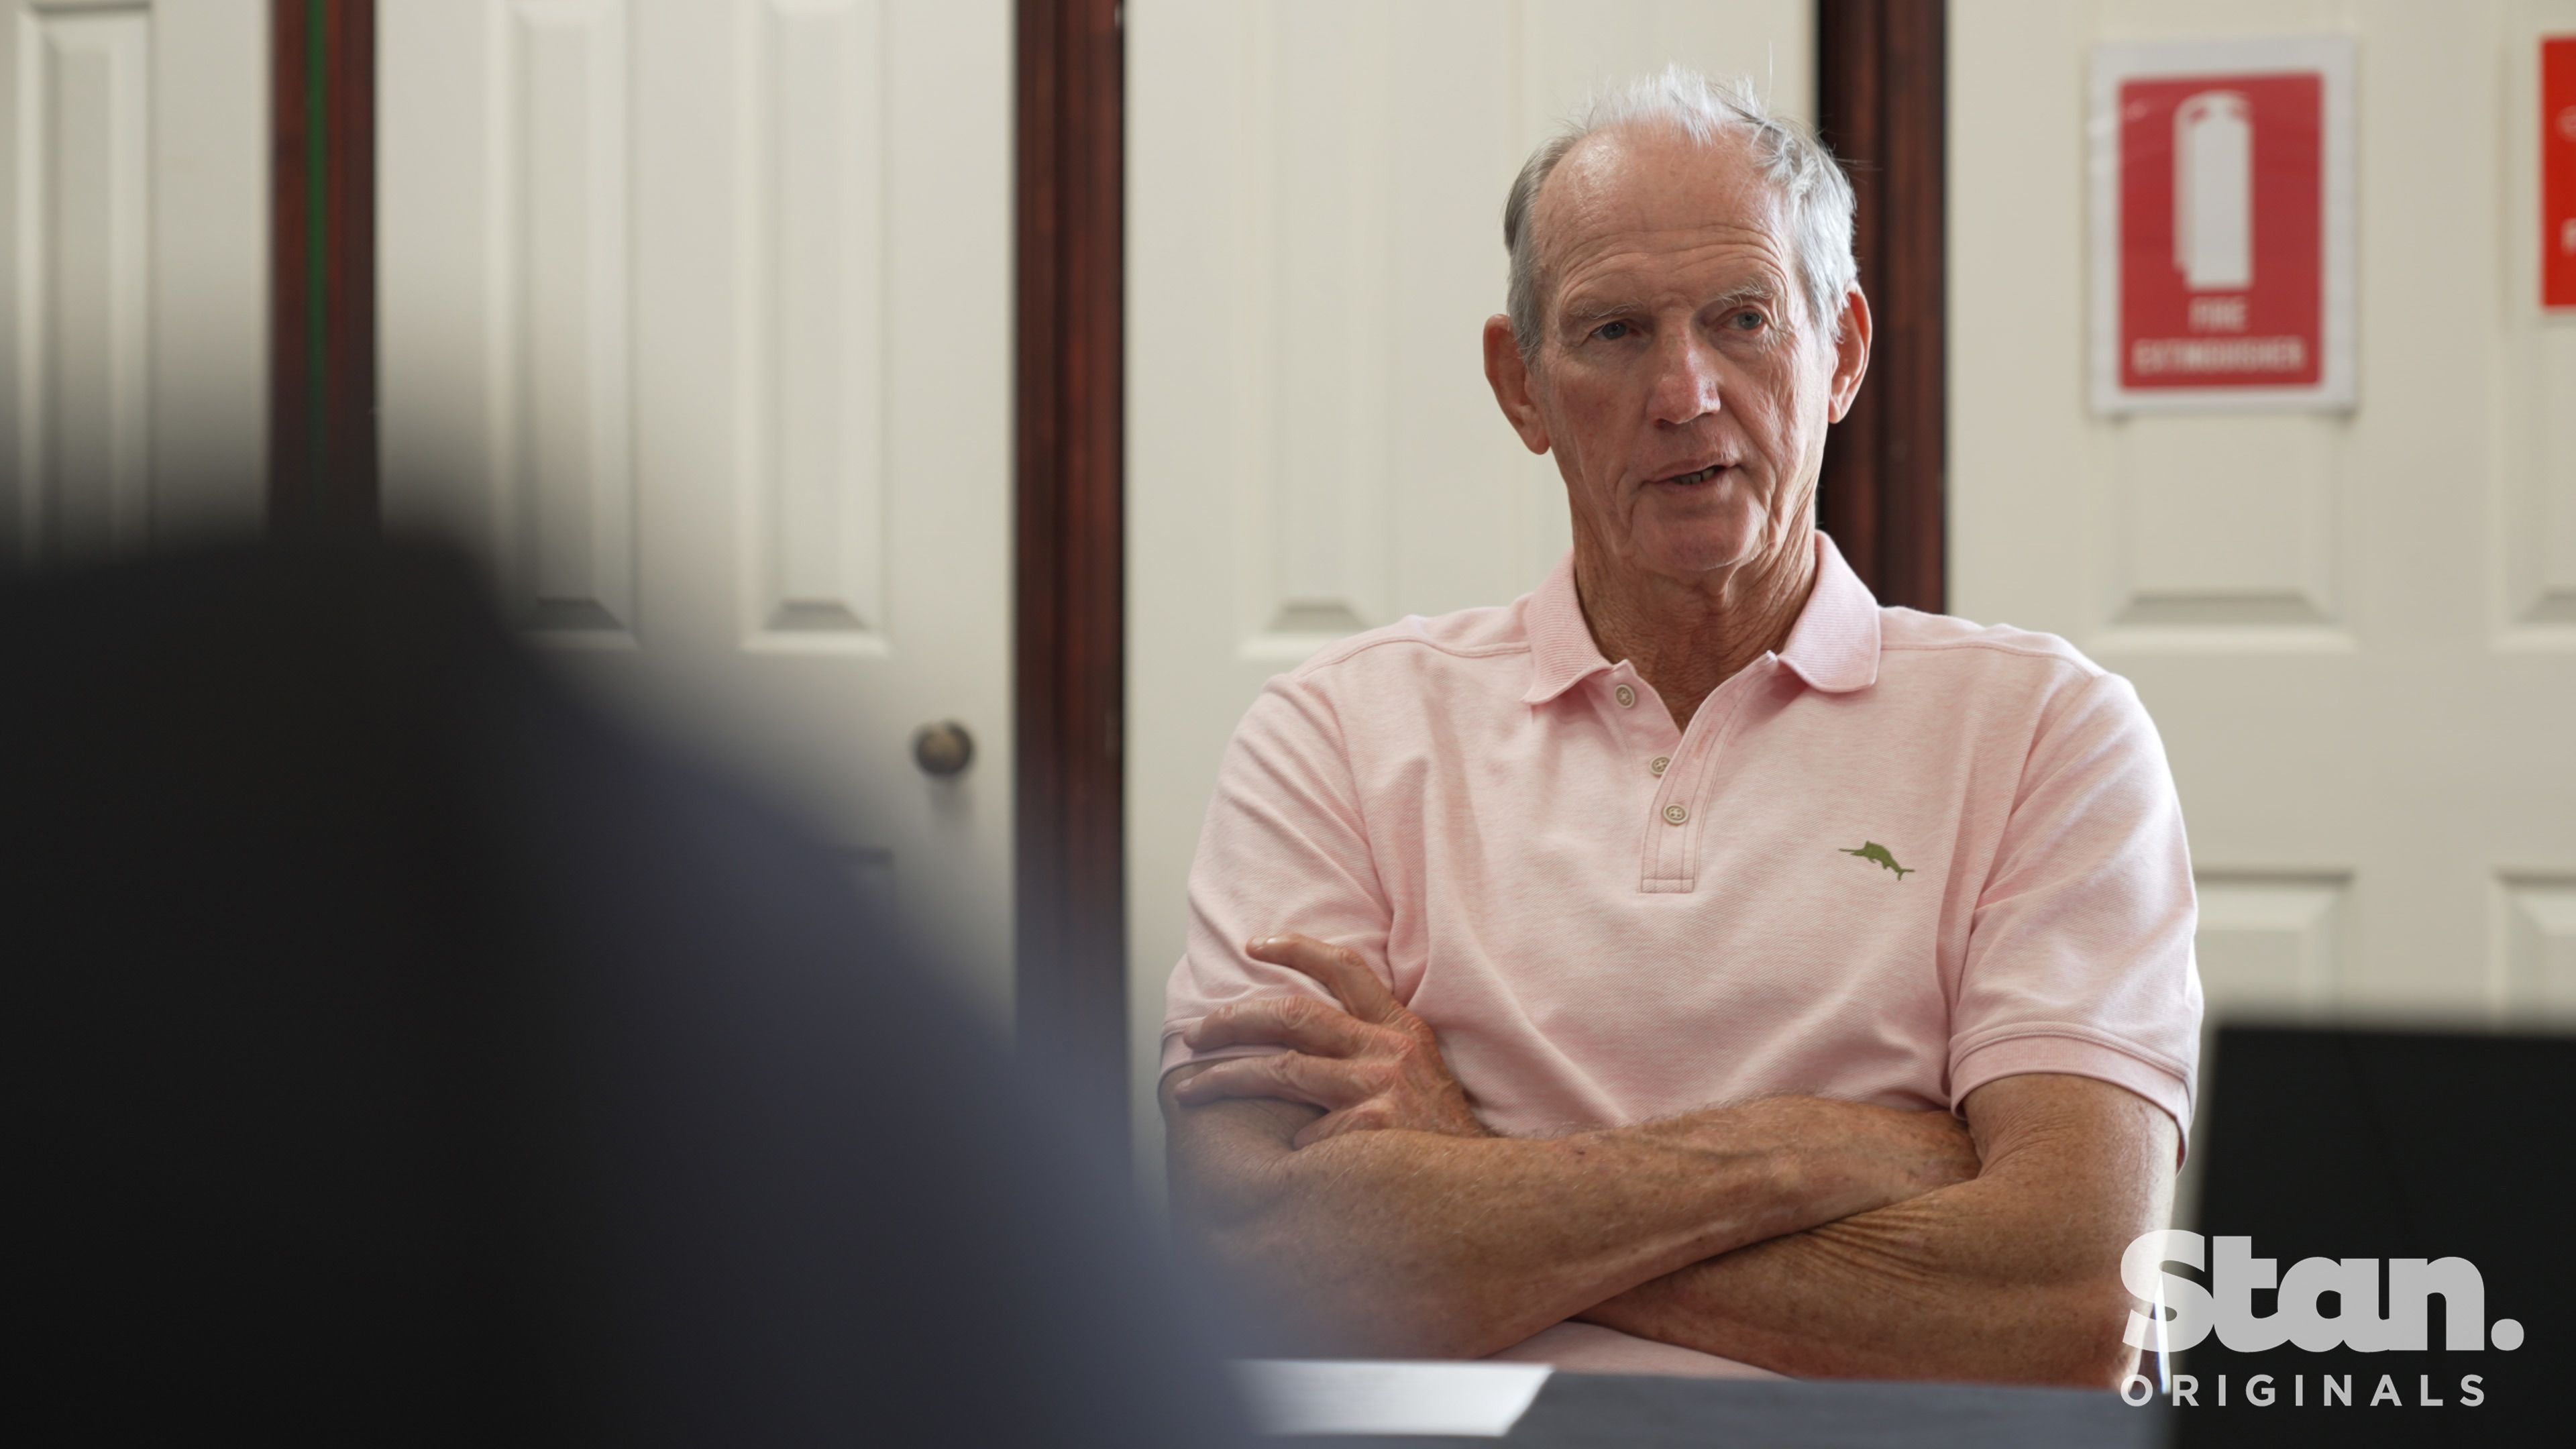 Wayne Bennett features in Stan Original&#x27;s Dawn of the Dolphins documentary.